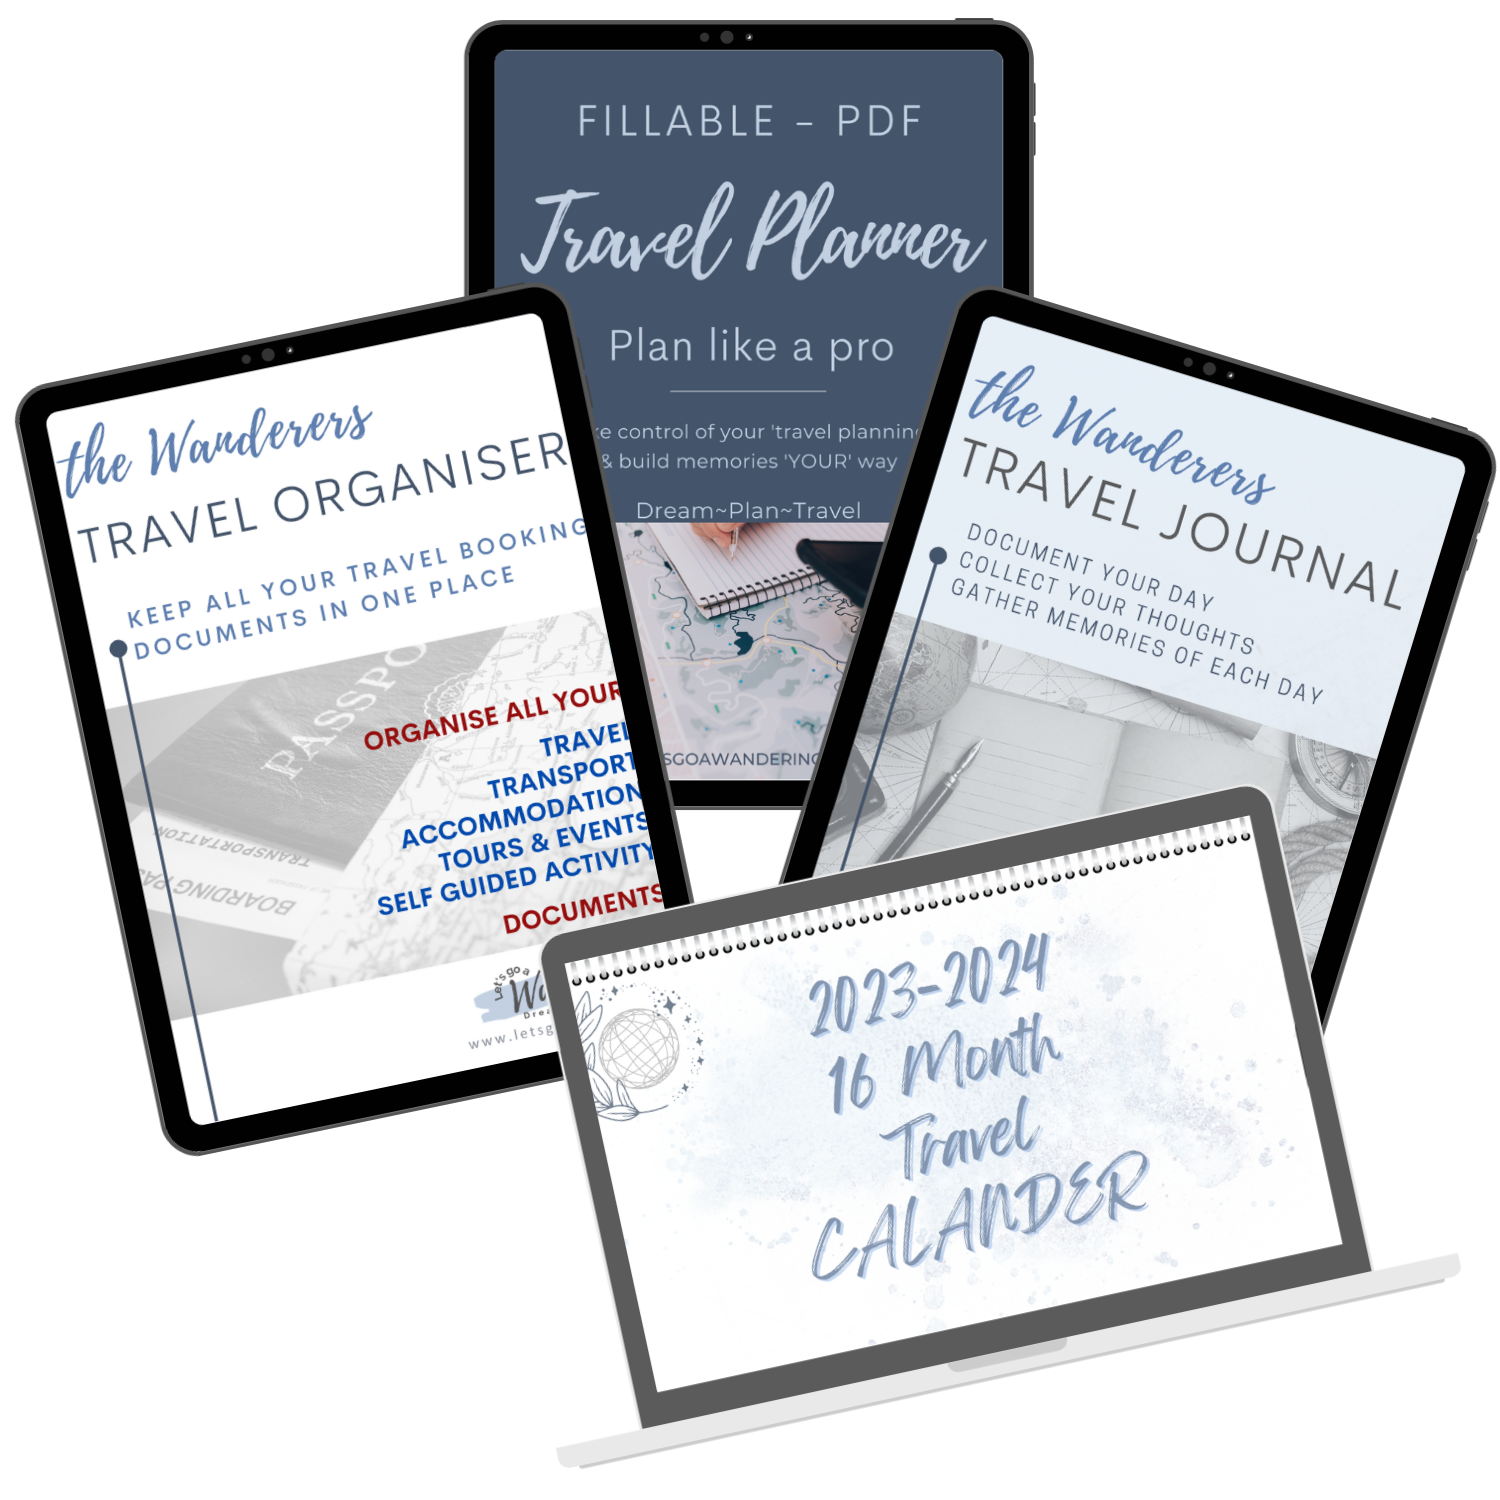 Image of the elements of the digital travel planning bundle